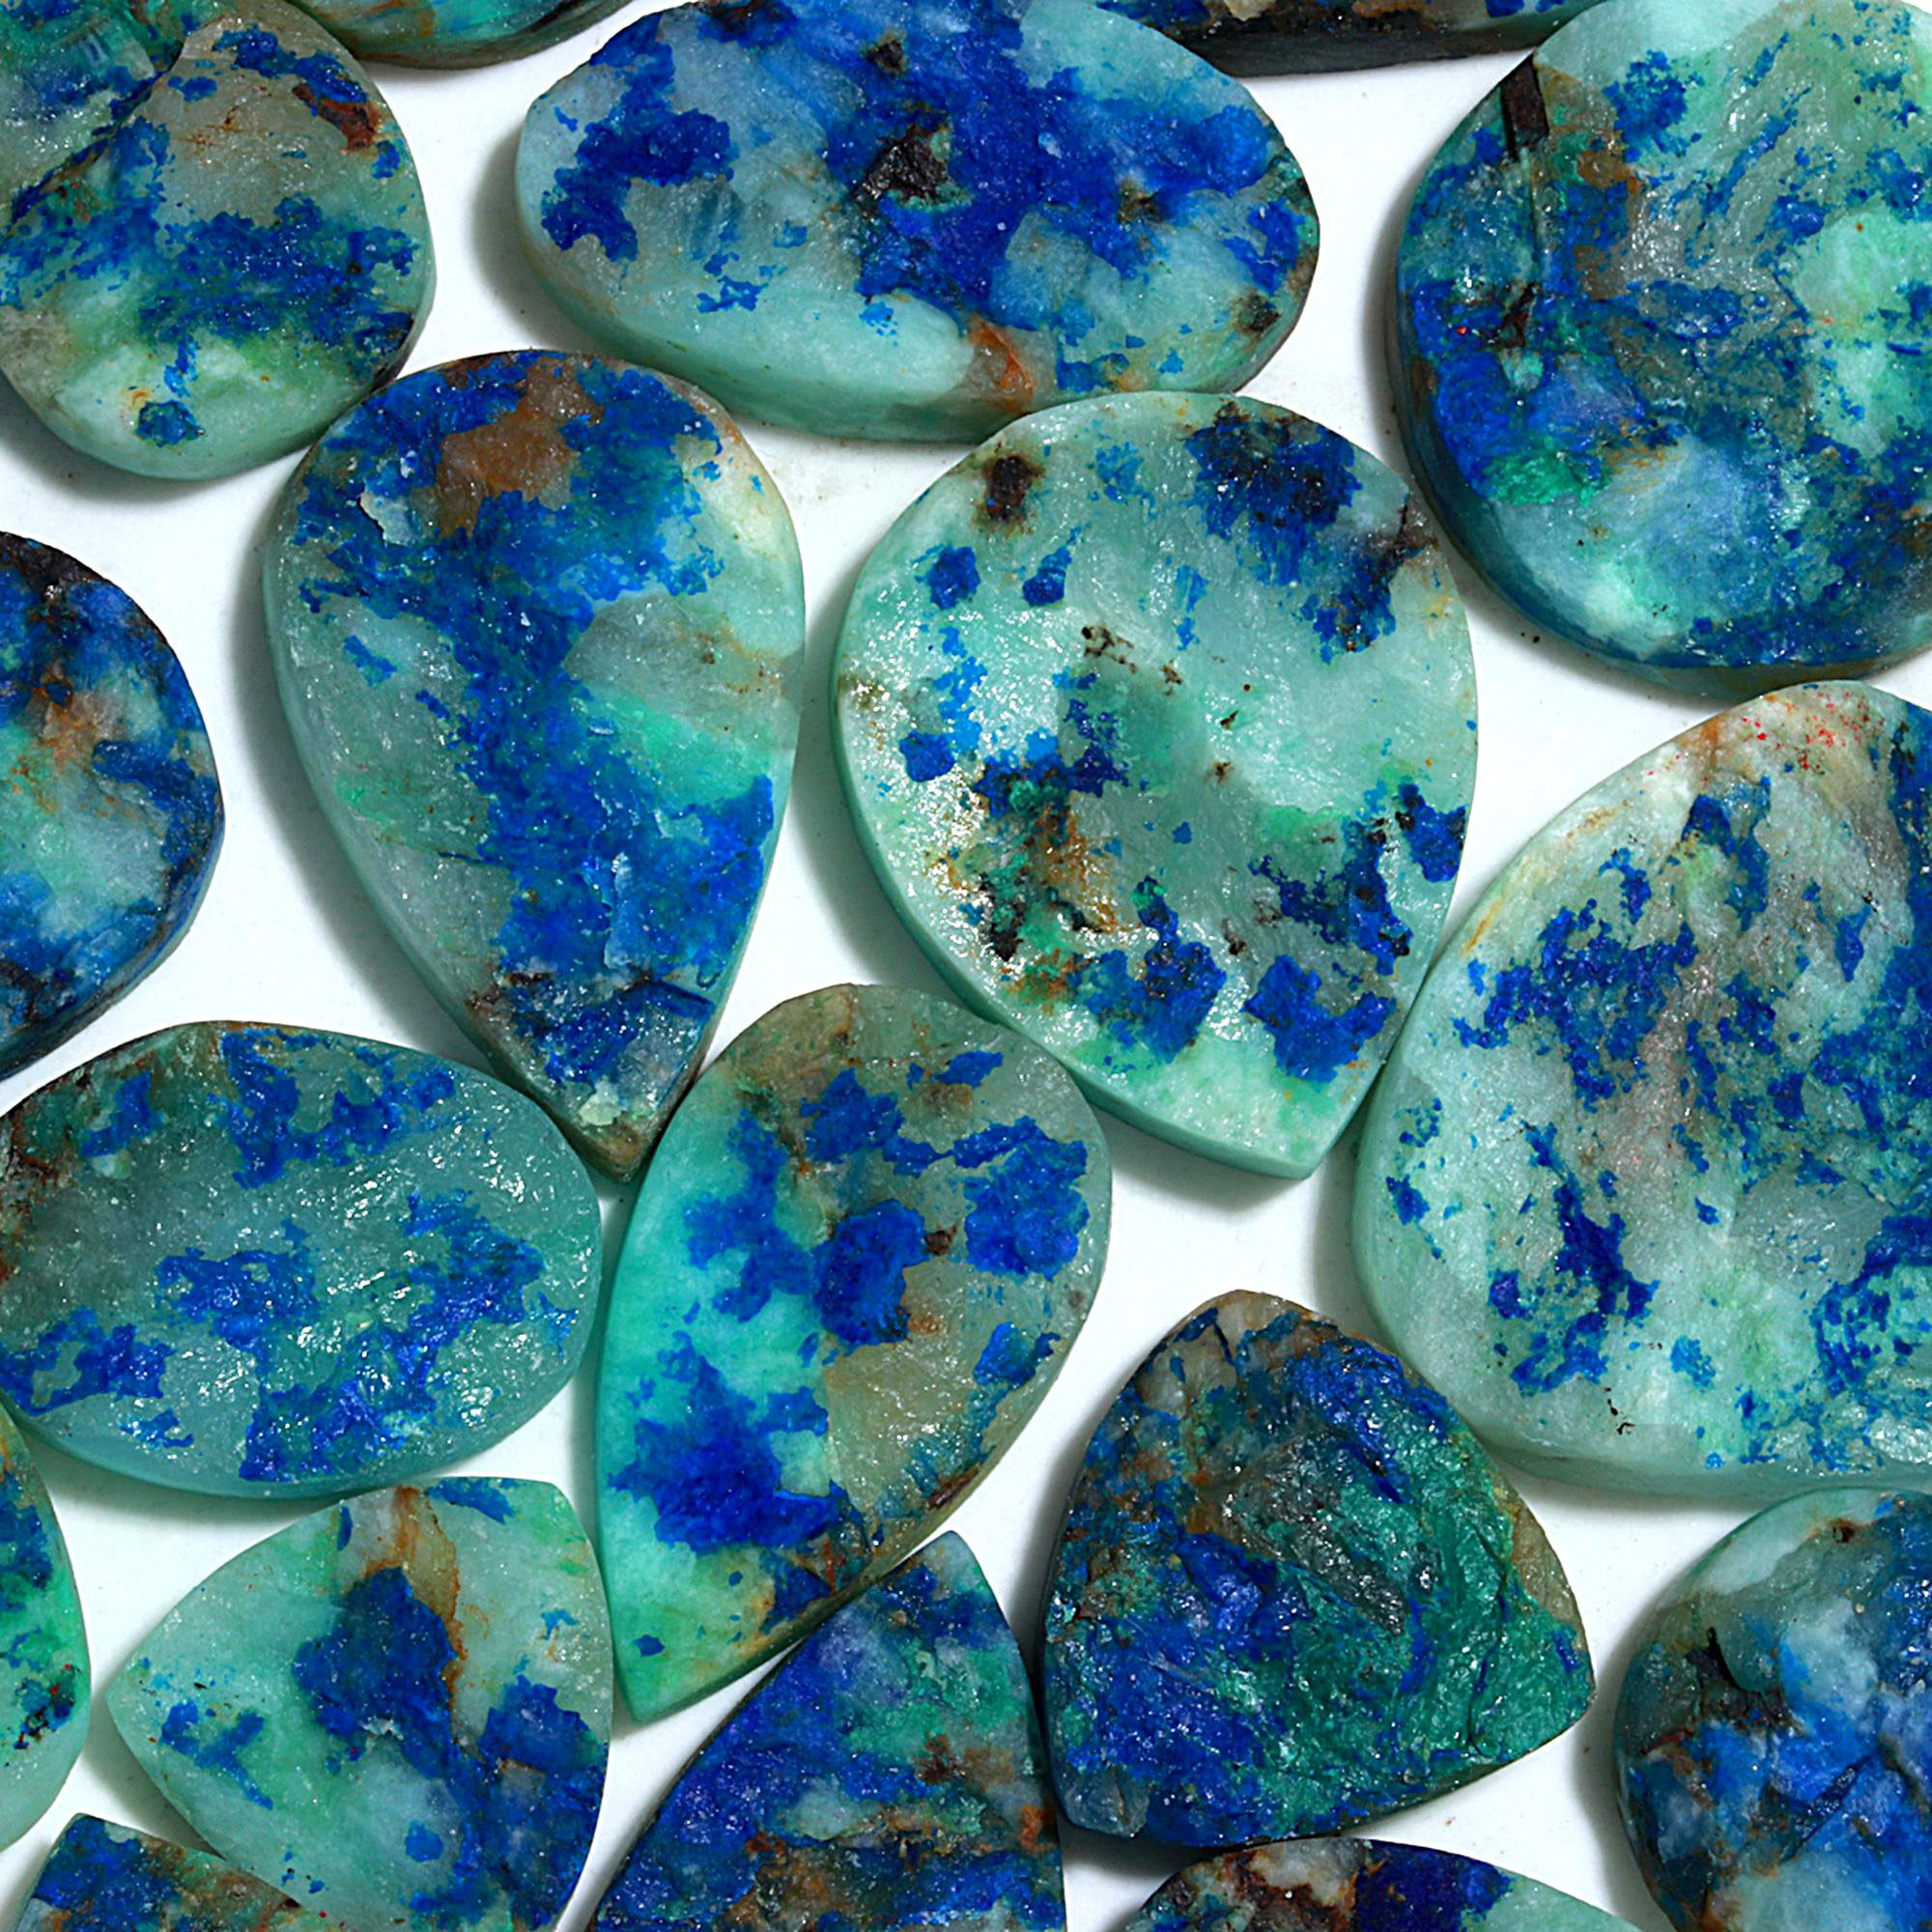 19 Pcs 600.Cts Natural Azurite Druzy Unpolished Loose Cabochon Gemstone For Jewelry Wholesale Lot Size 41x25 19x20mm